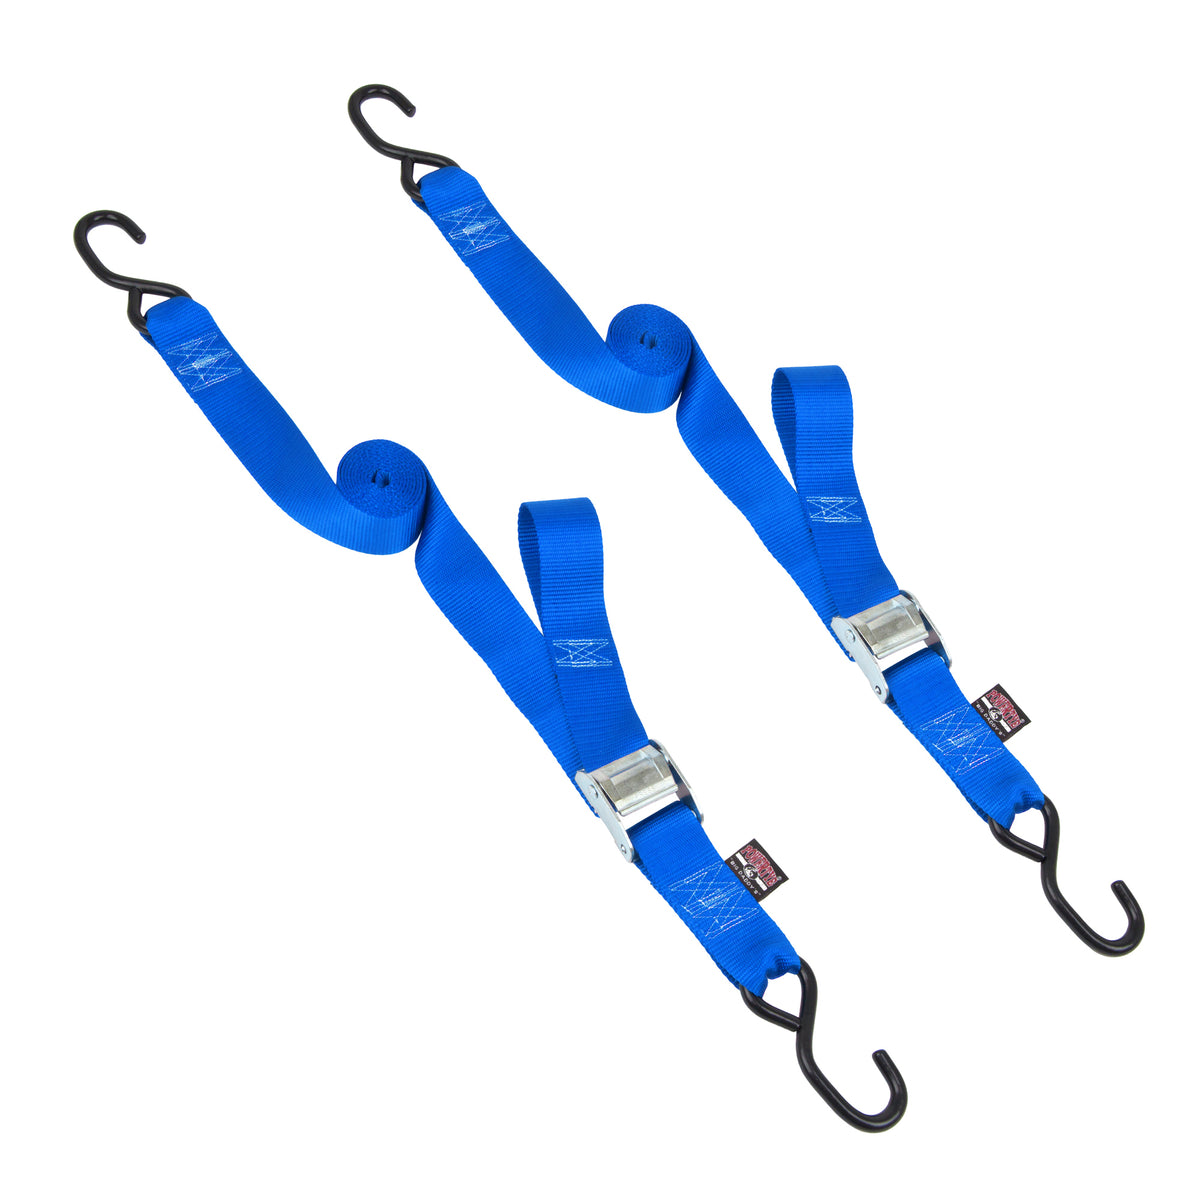 2 x 8' Cam Buckle Strap with S-Hooks